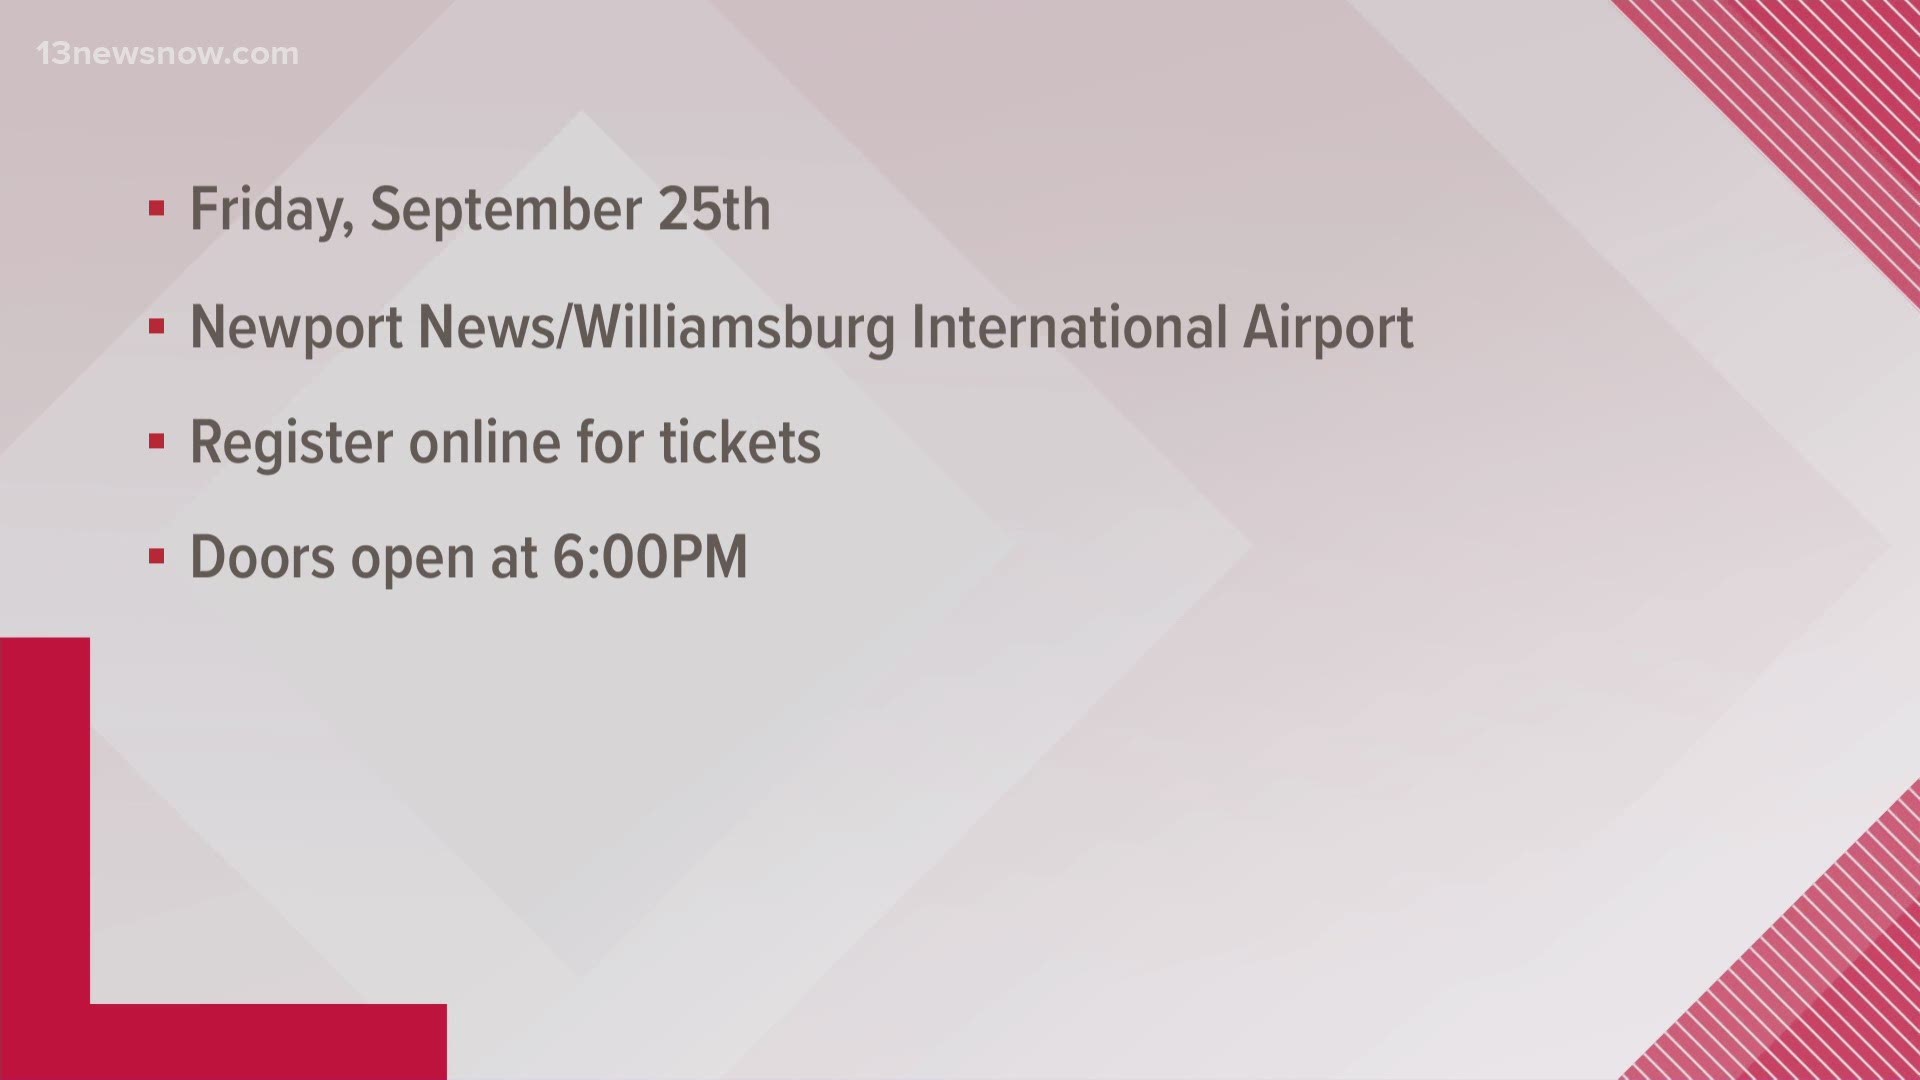 President Donald Trump will be holding a campaign rally at the Newport News/Williamsburg Airport on Sept. 25.